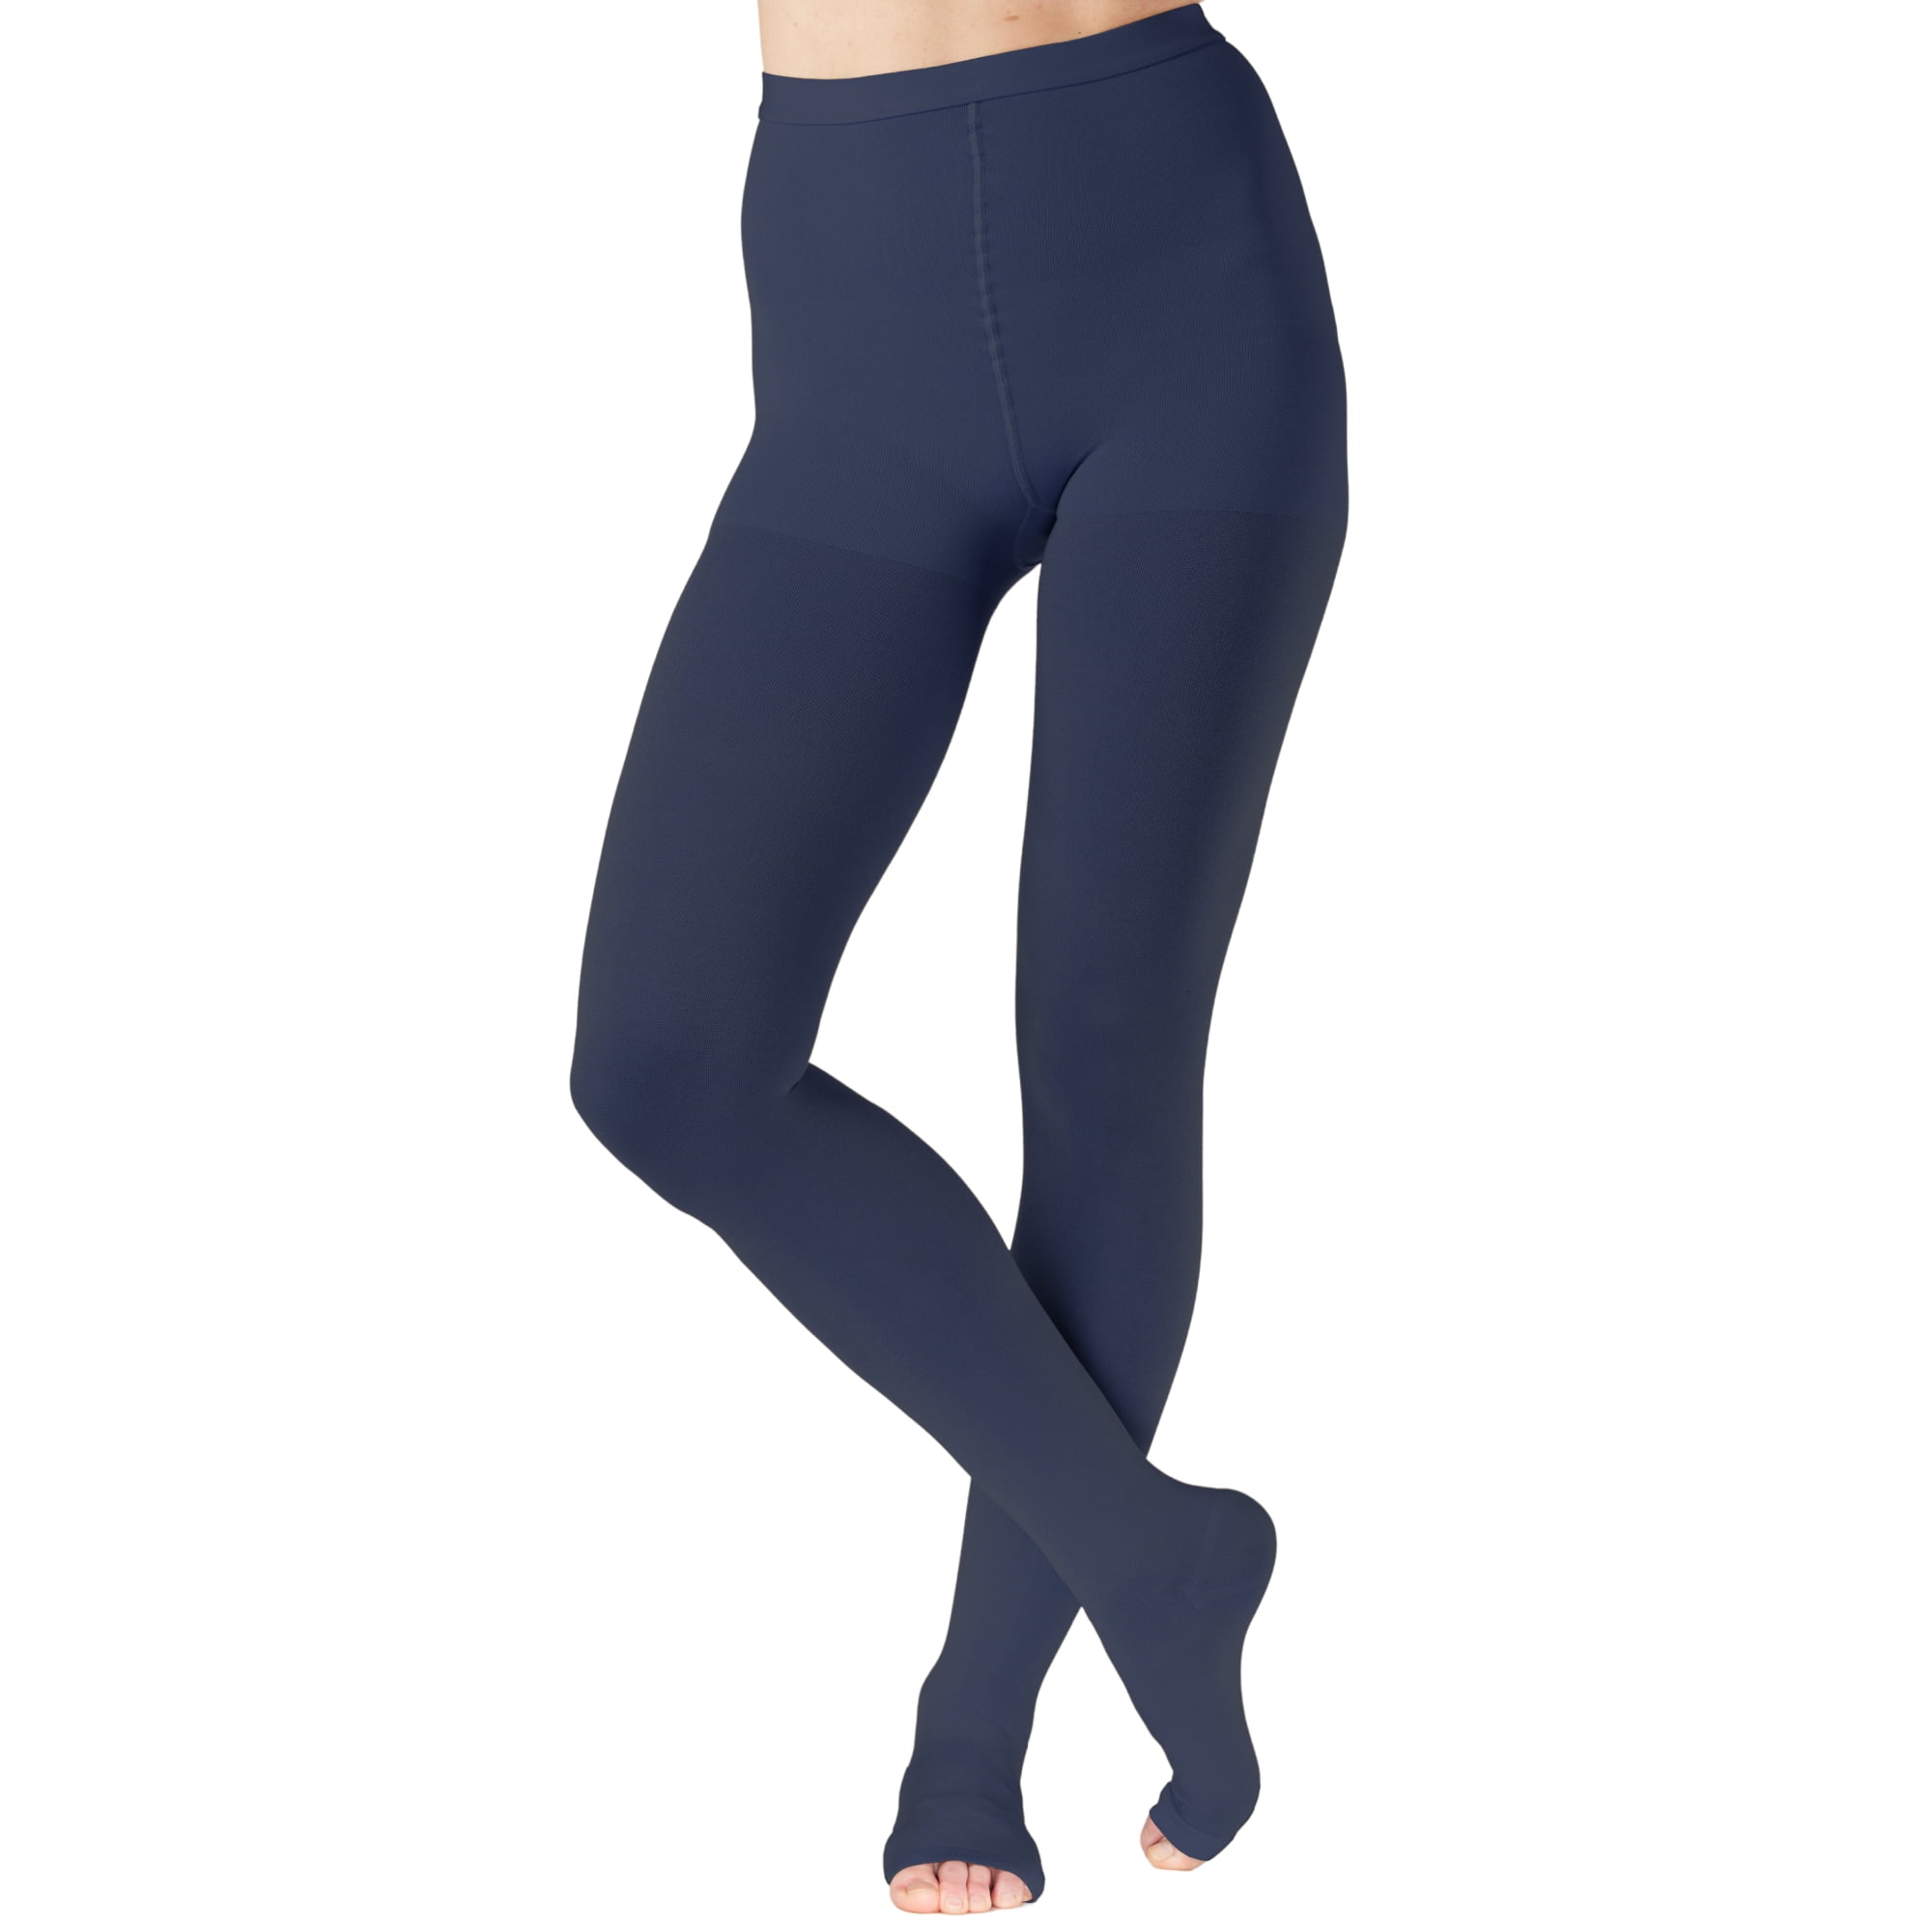 Plus Size Womens Compression Tights 20-30mmHg with Open Toe - Navy